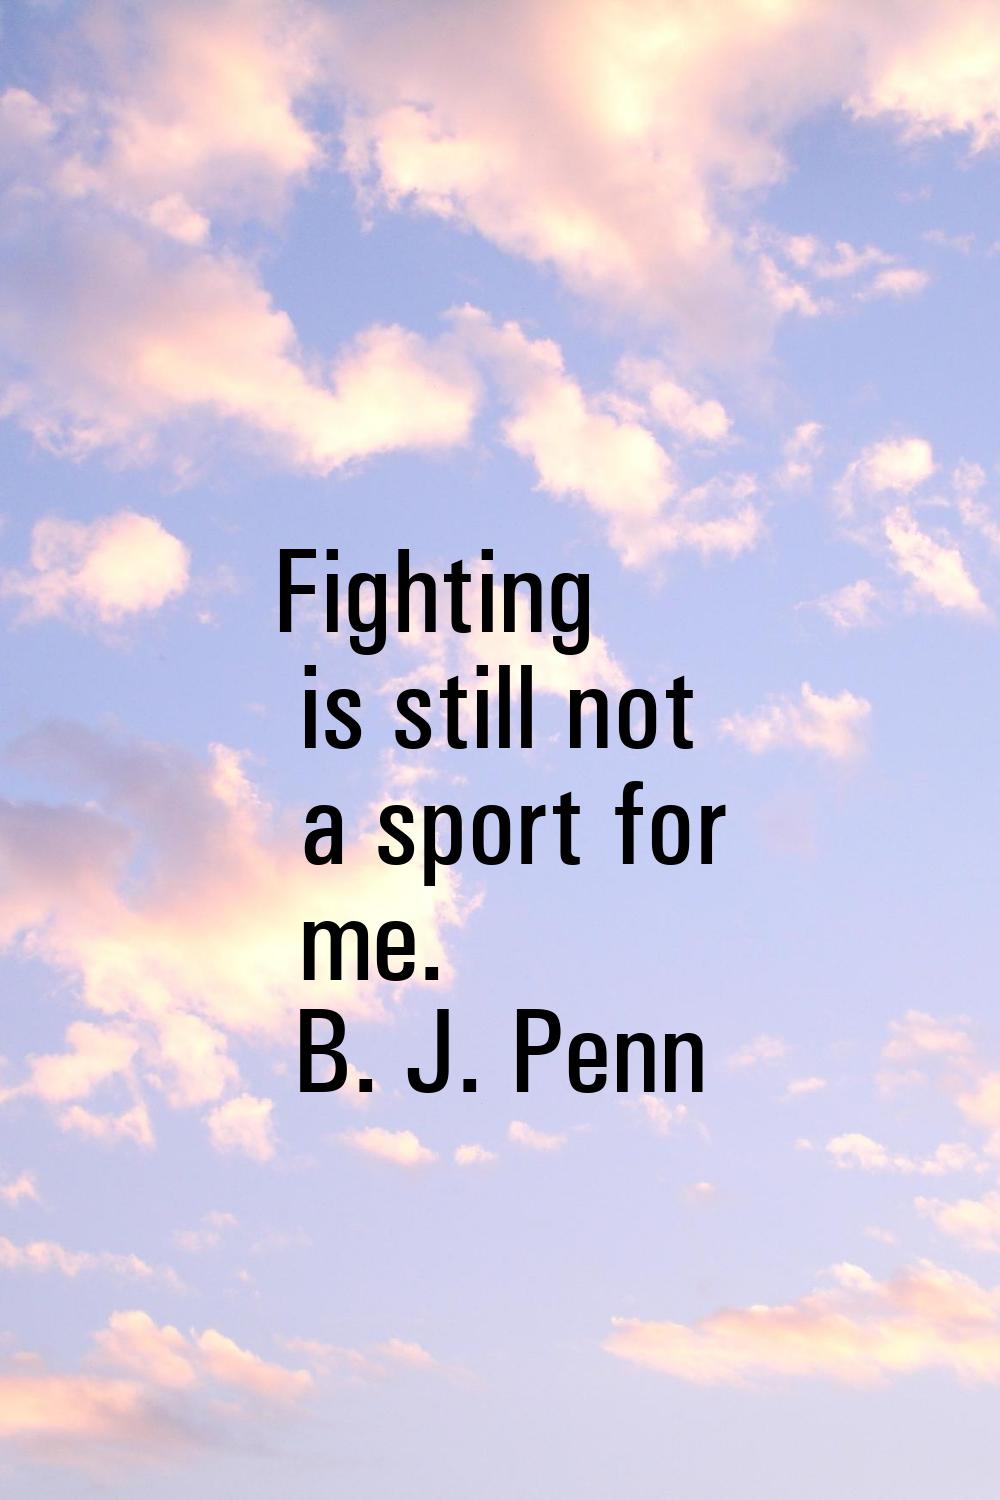 Fighting is still not a sport for me.